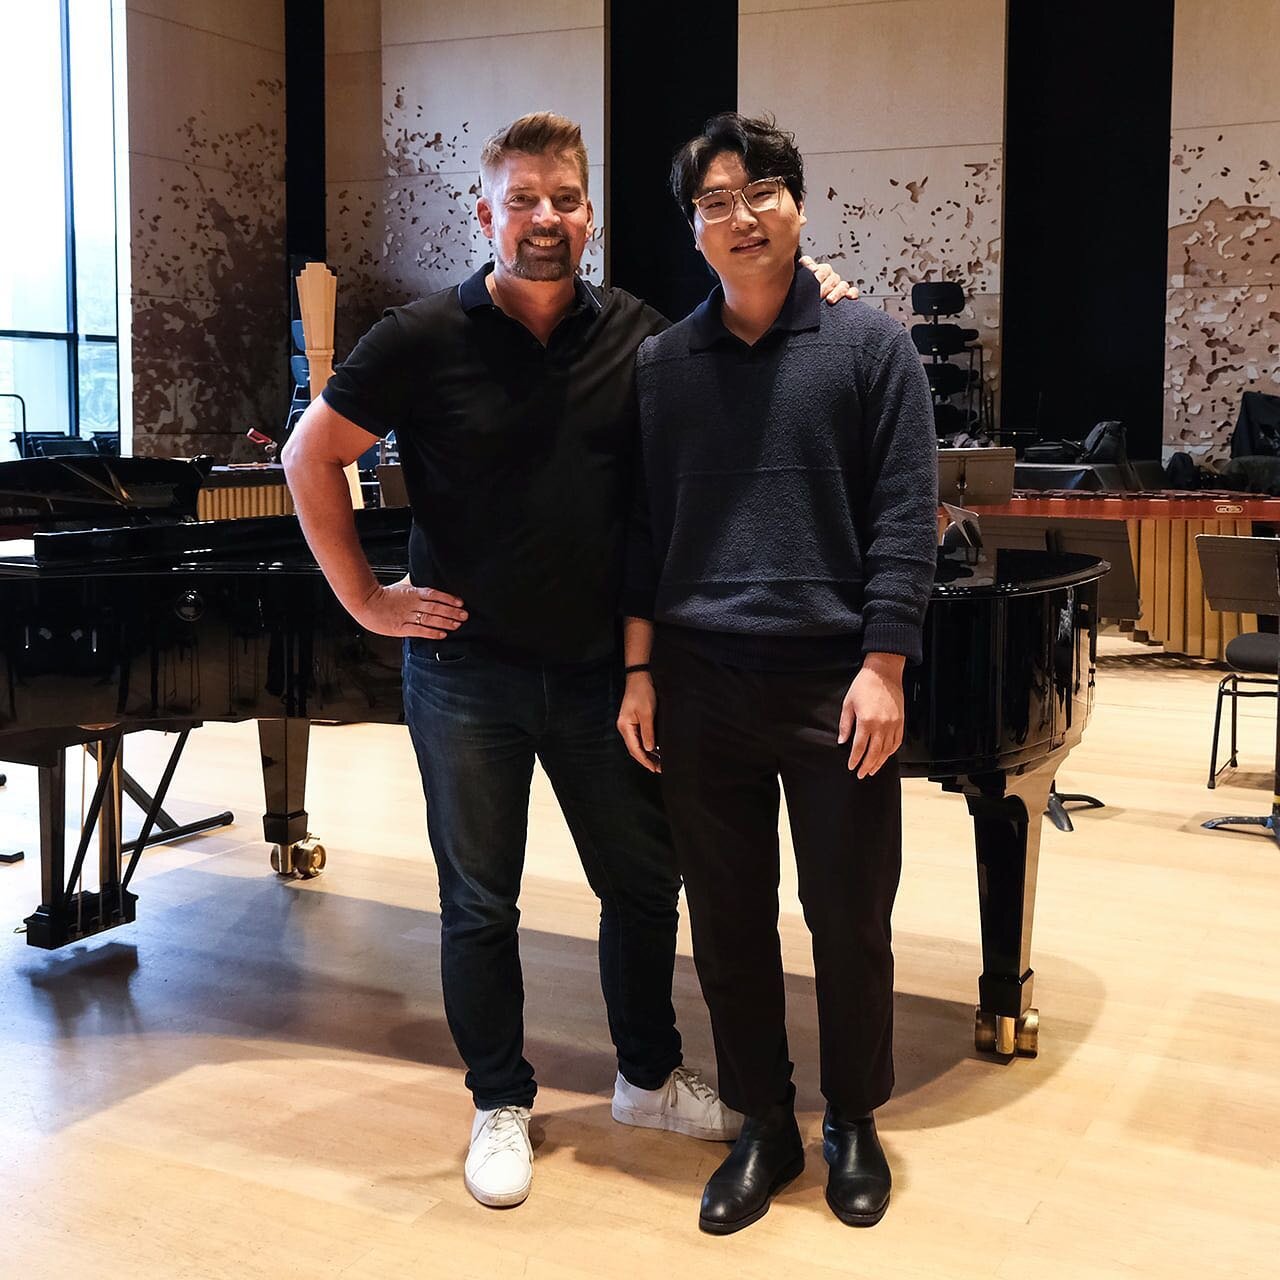 #MomentumInAction This week, young conductor and composer @jaehyuckchoi_official works with the @ensemble.intercontemporain and assists @inlovewithyofi Matthias Pintscher at the @philharmoniedeparis - many thanks for being part of Momentum and toi to